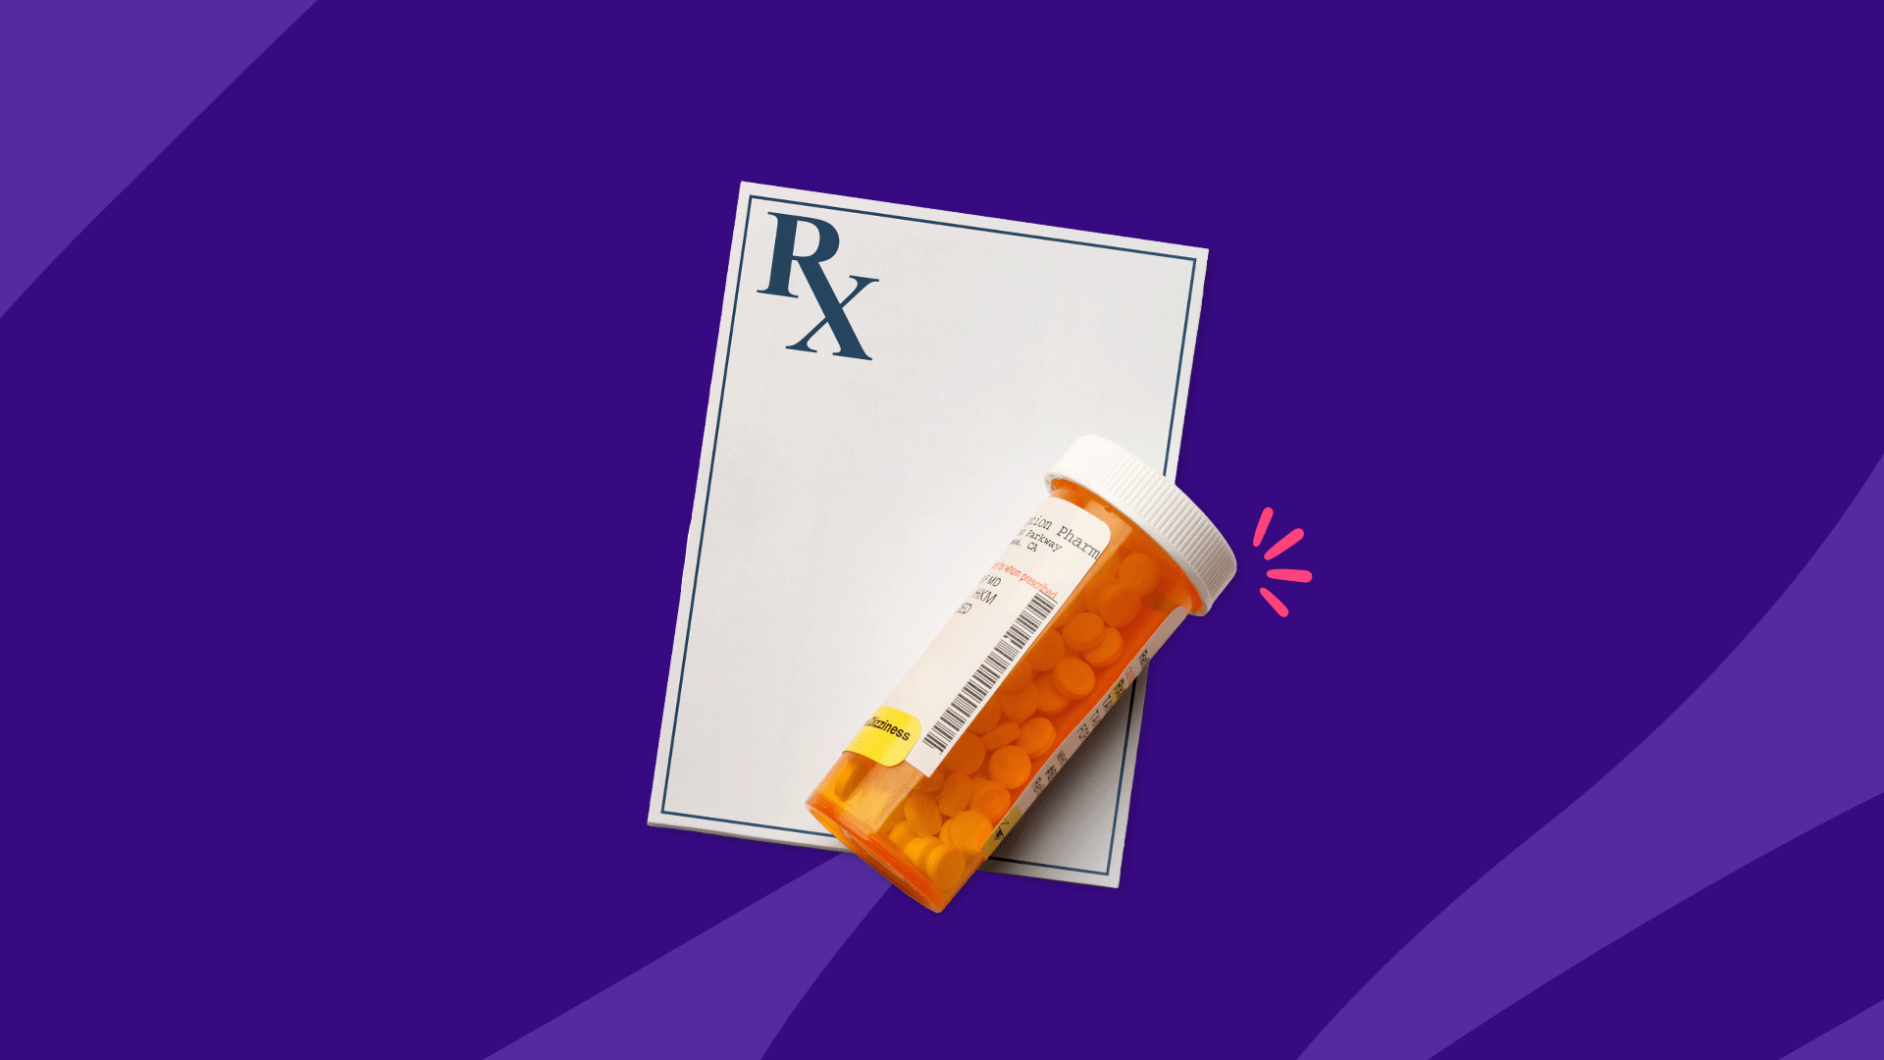 Rx pill bottle and prescription pad: Sertraline interactions to avoid